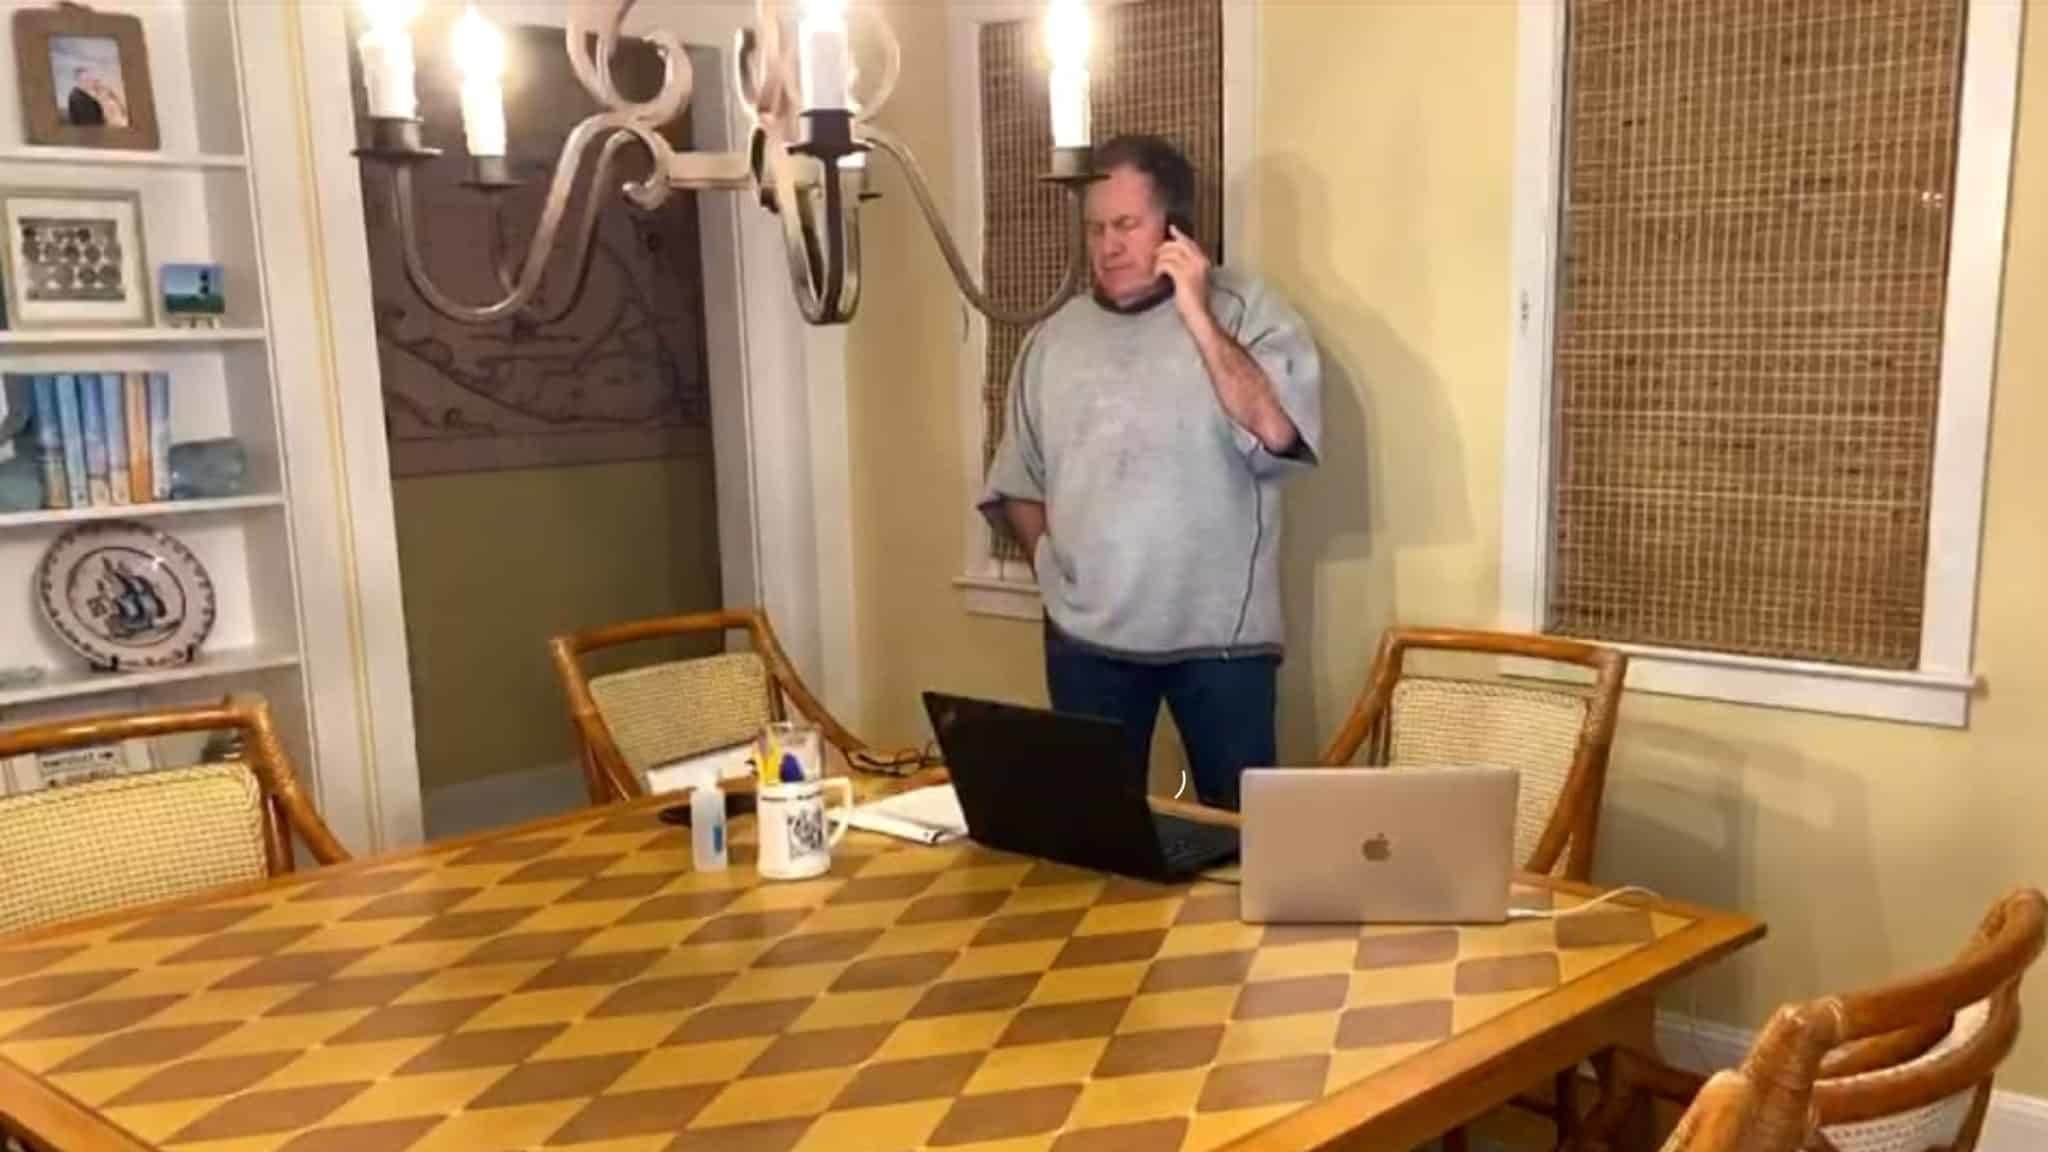 UNSPECIFIED LOCATION - APRIL 23: (EDITORIAL USE ONLY) In this still image from video provided by the New England Patriots, Head Coach Bill Belichick speaks via teleconference after being selected during the first round of the 2020 NFL Draft on April 23, 2020.